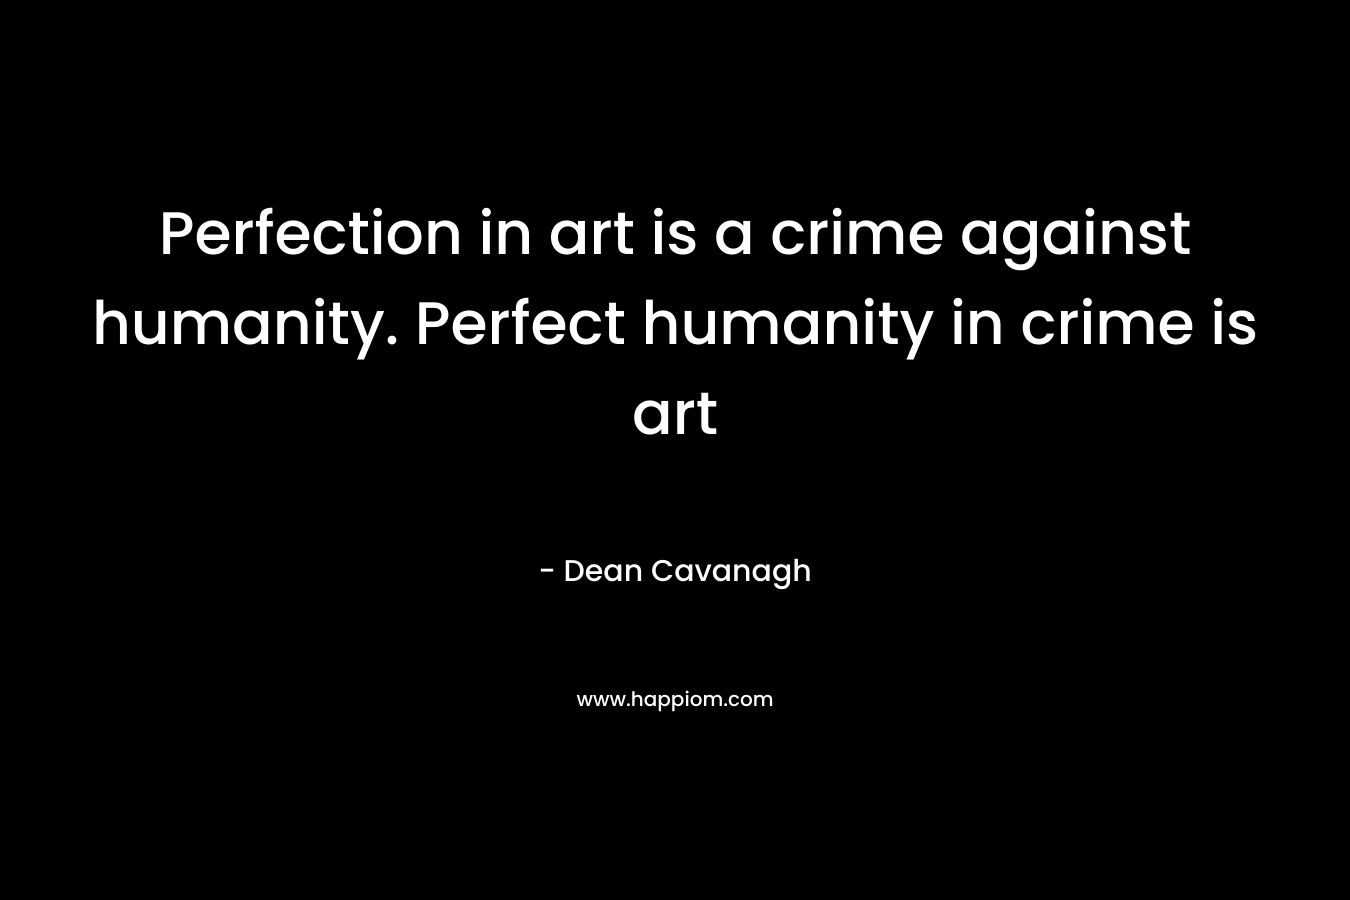 Perfection in art is a crime against humanity. Perfect humanity in crime is art